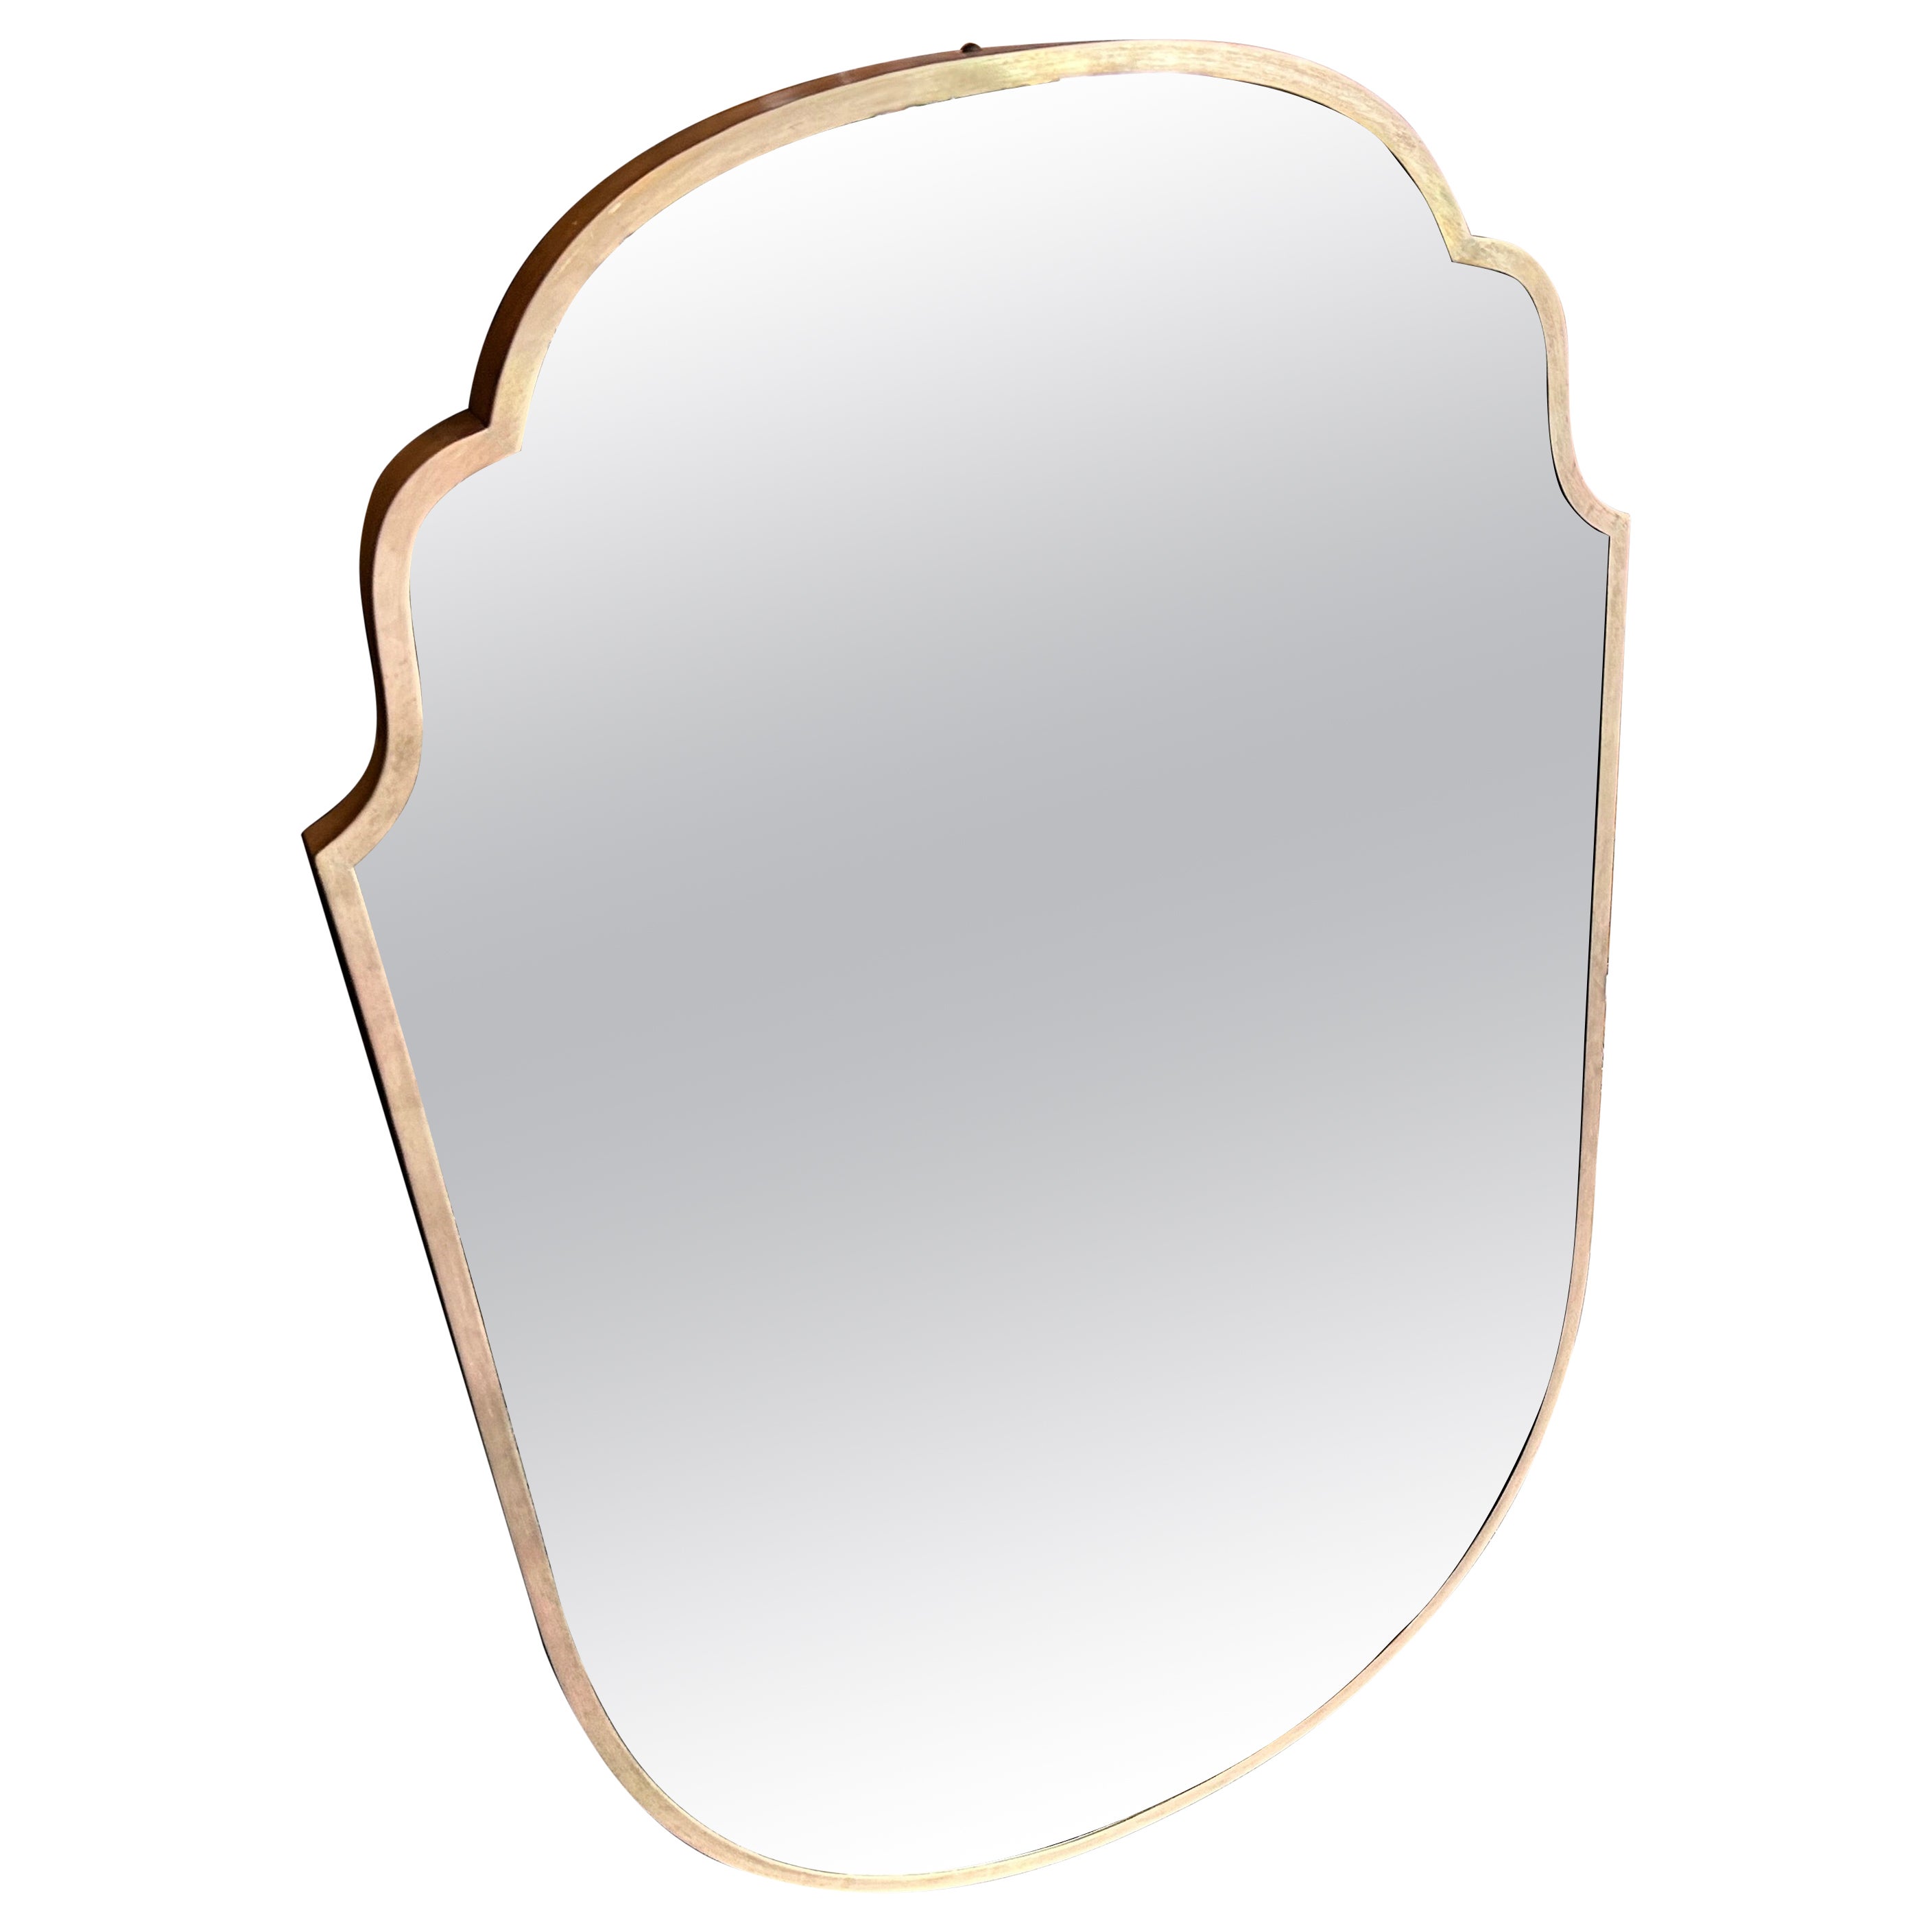 1950s Gio Ponti Style Mid-Century Modern Brass Well Shaped Italian Wall Mirror For Sale